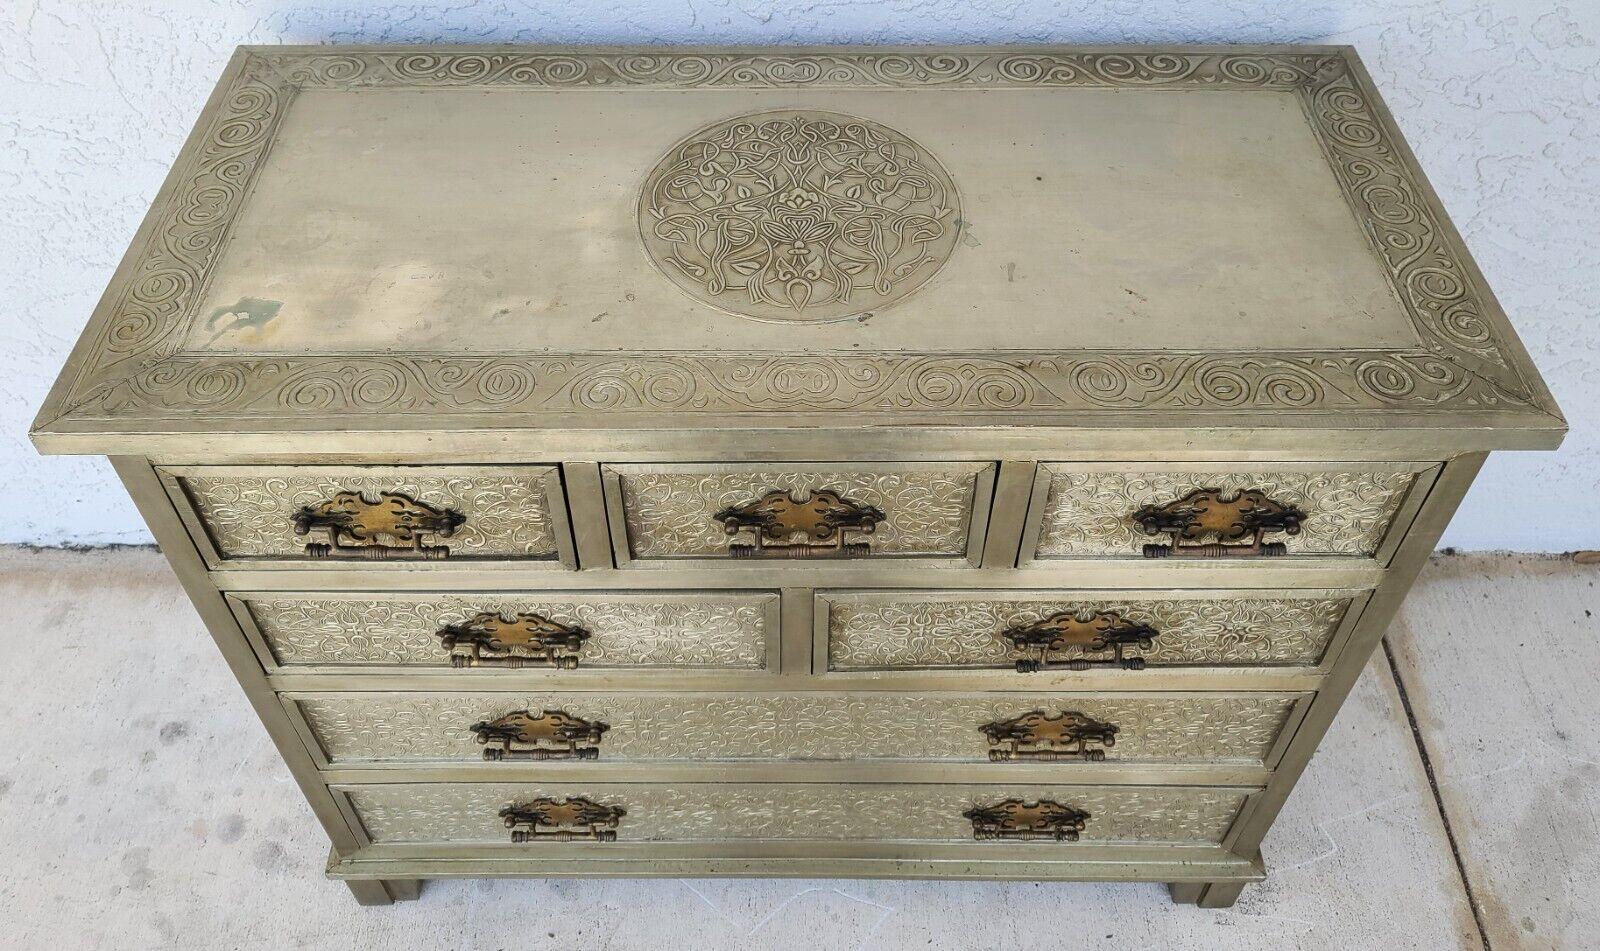 Offering One Of Our Recent Palm Beach Estate Fine Furniture Acquisitions Of An Art Nouveau French style Decorative Embossed Metal Dresser or Commode
It is solid wood wrapped in decorative metal.

Approximate Measurements in Inches
35